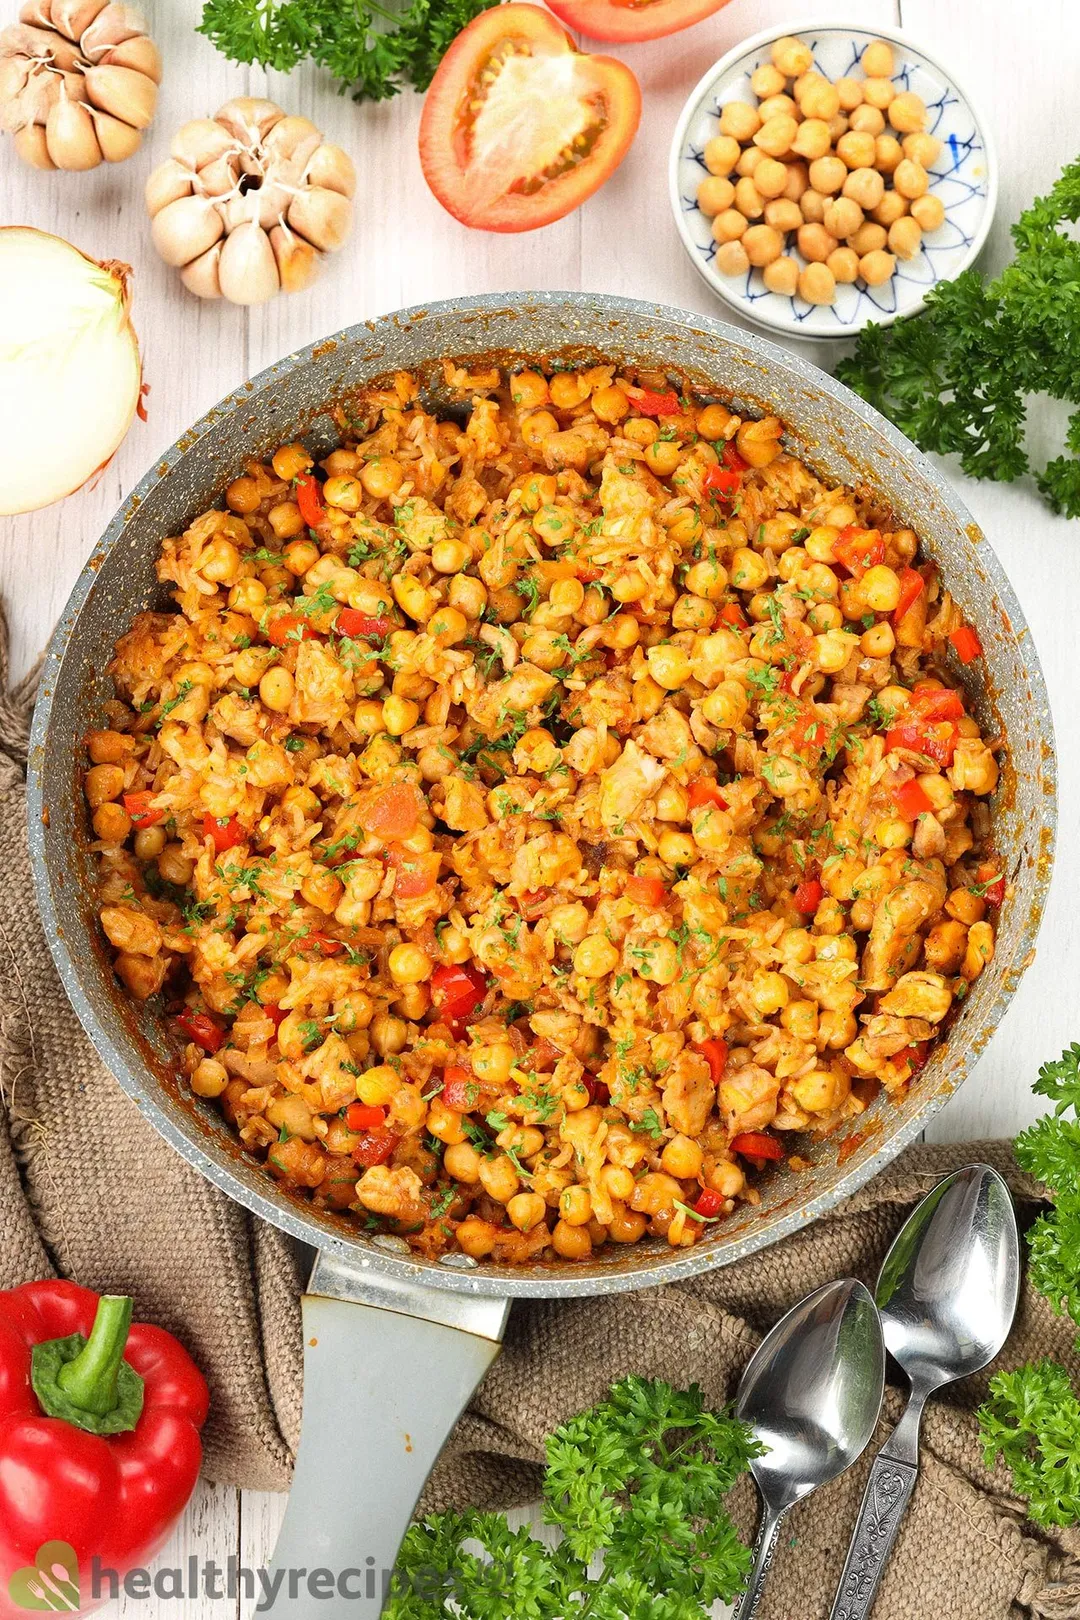 A large pan filled with chickpea, rice, diced bell pepper, and chopped herbs surrounded by garlic cloves, tomato halves, bell pepper, fresh parsley, spoons, and a brown cloth.